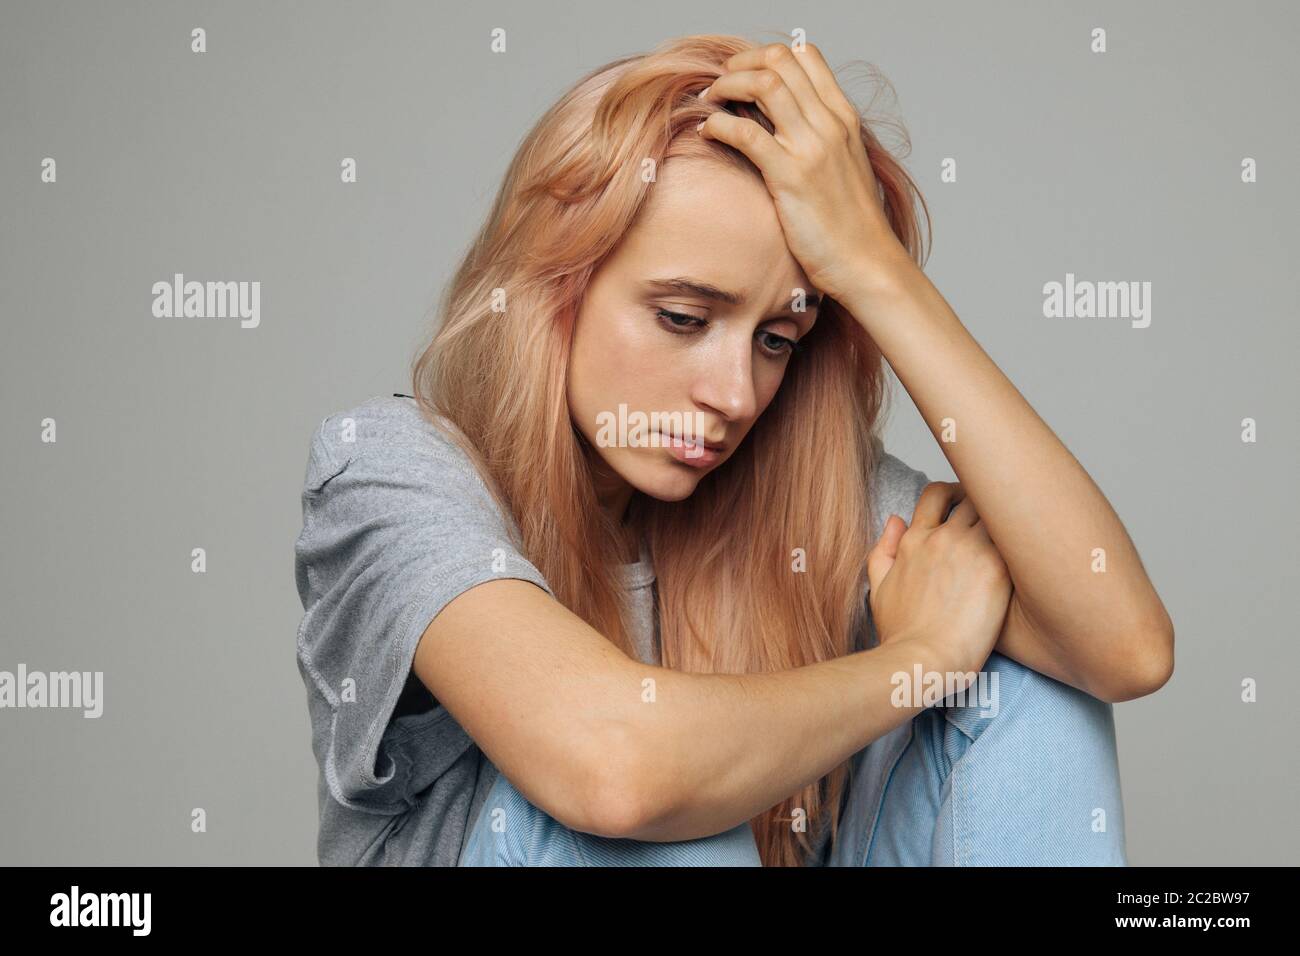 Crying young woman with feels unhappy and depressed, looking down and touching her forehead. Problem in relationships, relationships breakup, love dep Stock Photo